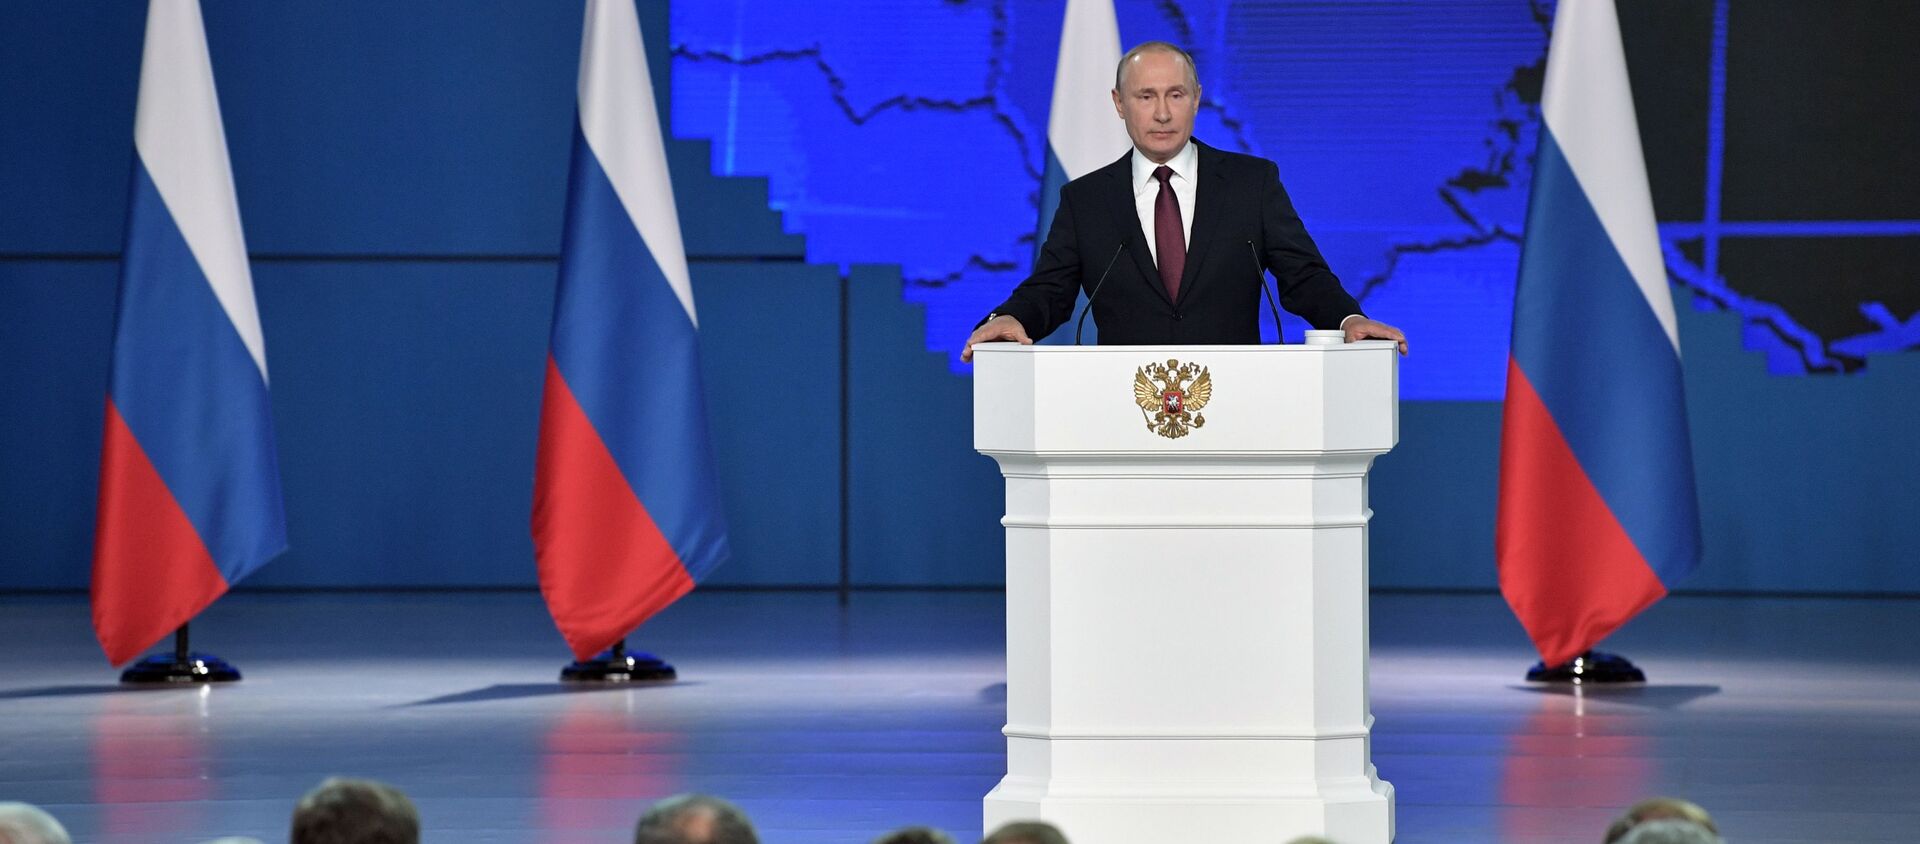 Vladimir Putin delivers his annual address to the Federal Assembly, 20 February 2019. - Sputnik International, 1920, 21.04.2021